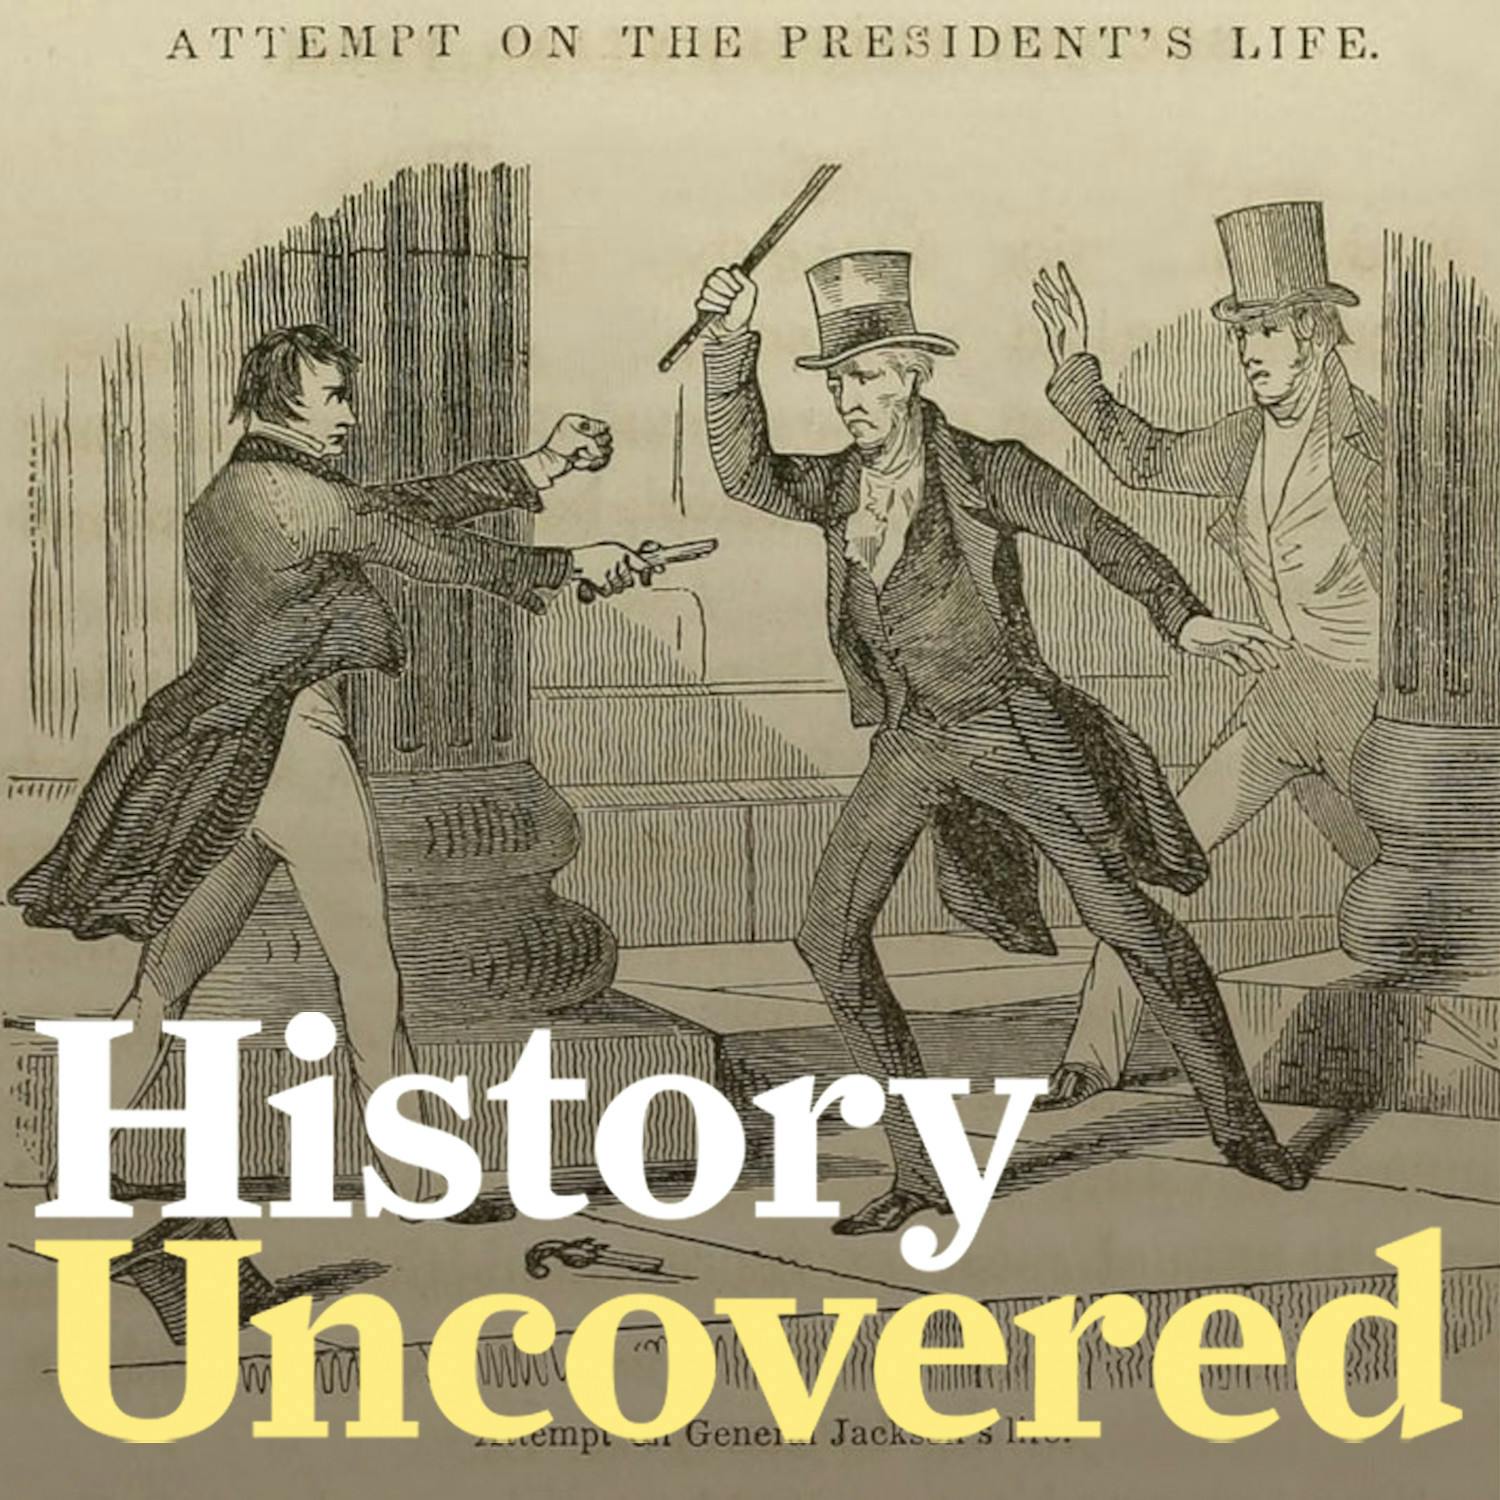 The First Presidential Assassination Attempt In U.S. History